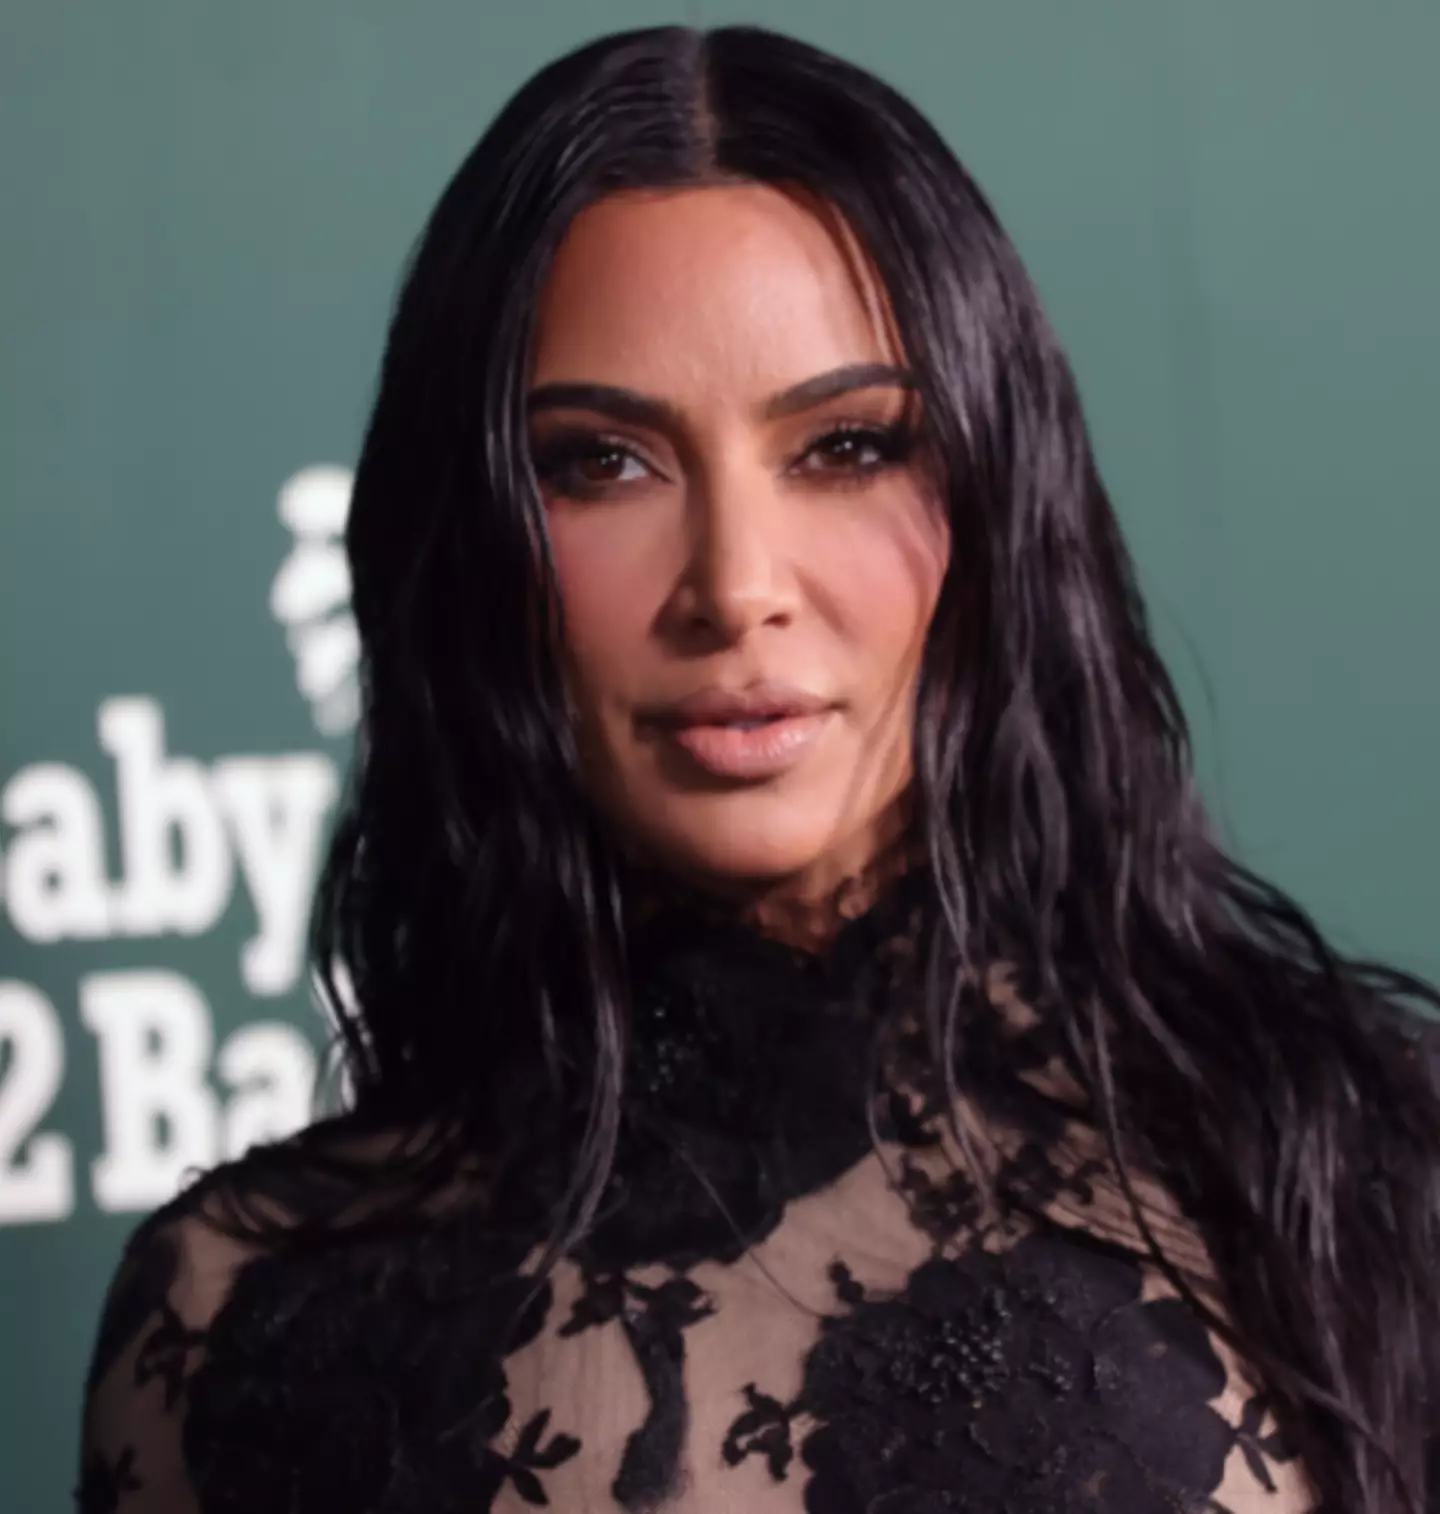 Kim Kardashian has previously voiced her support for Cantu, claiming he is 'an innocent man'.